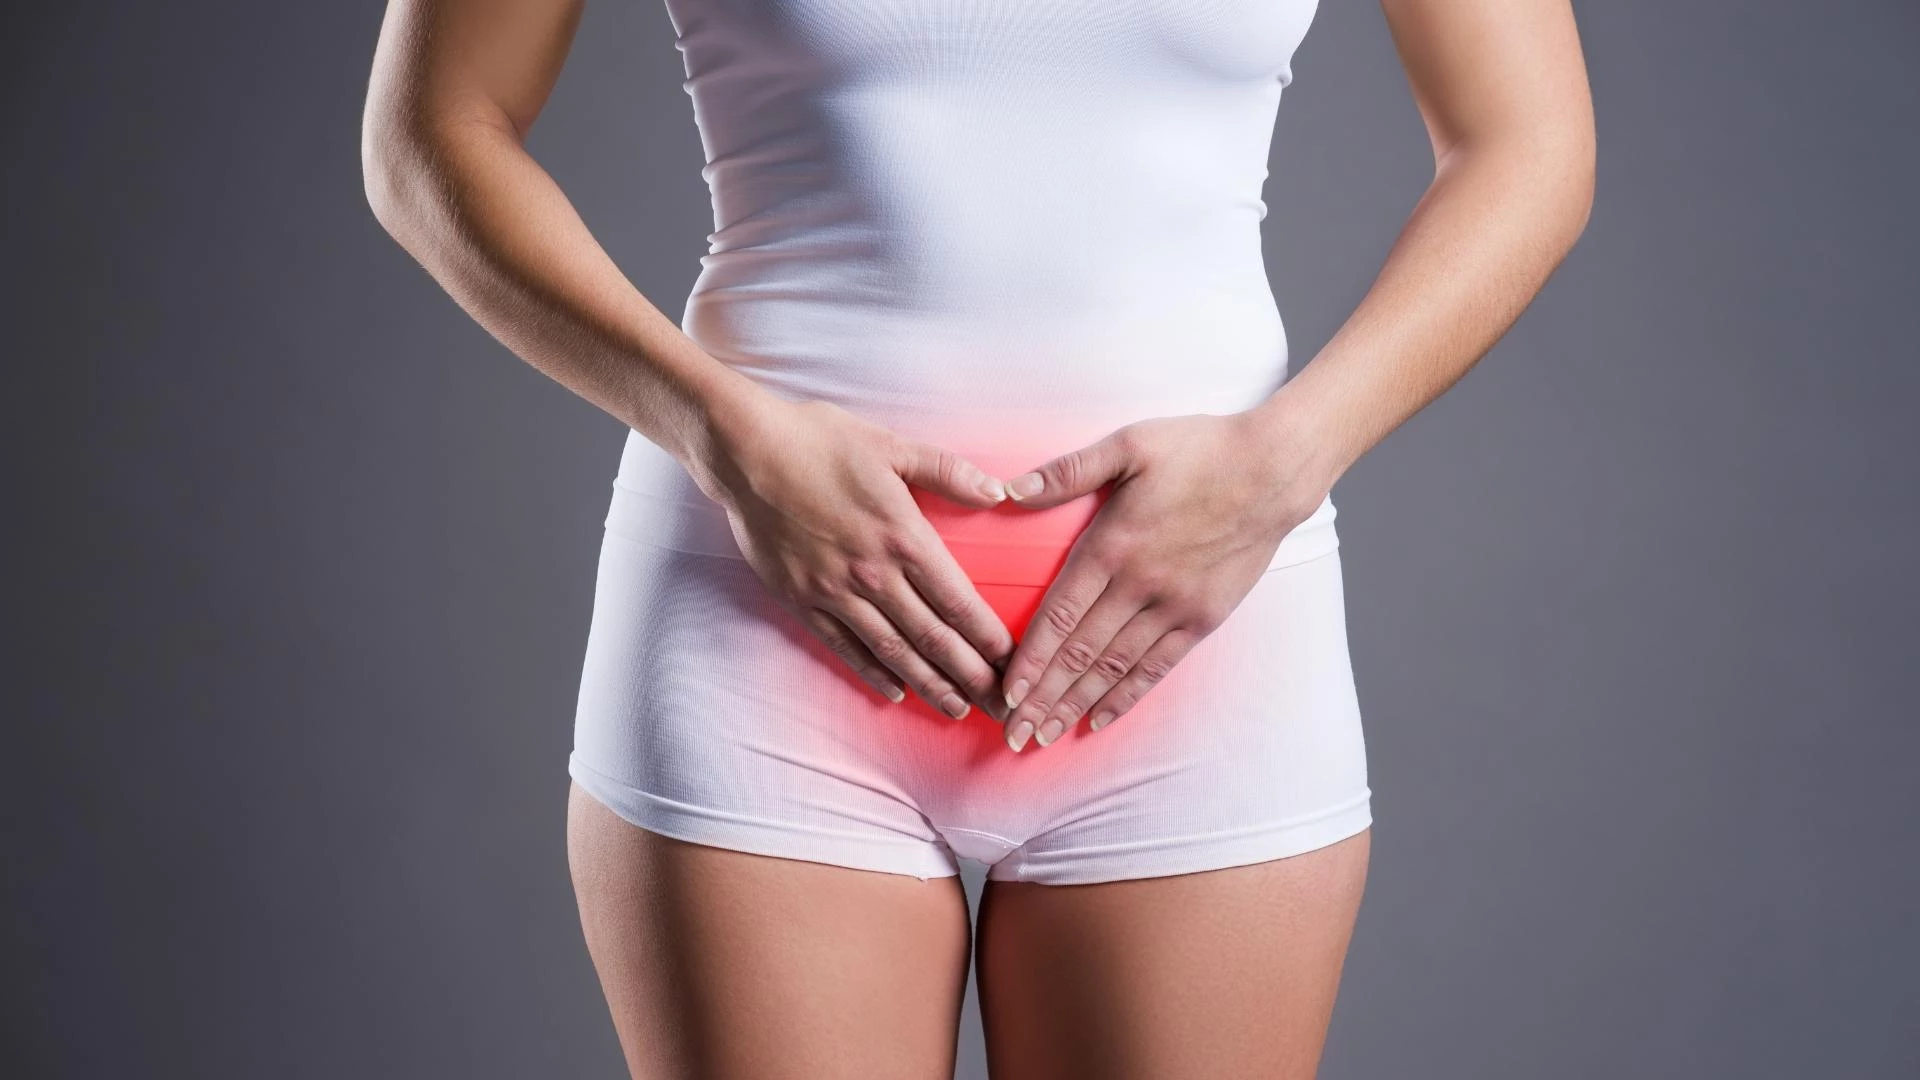 What is Cystitis?